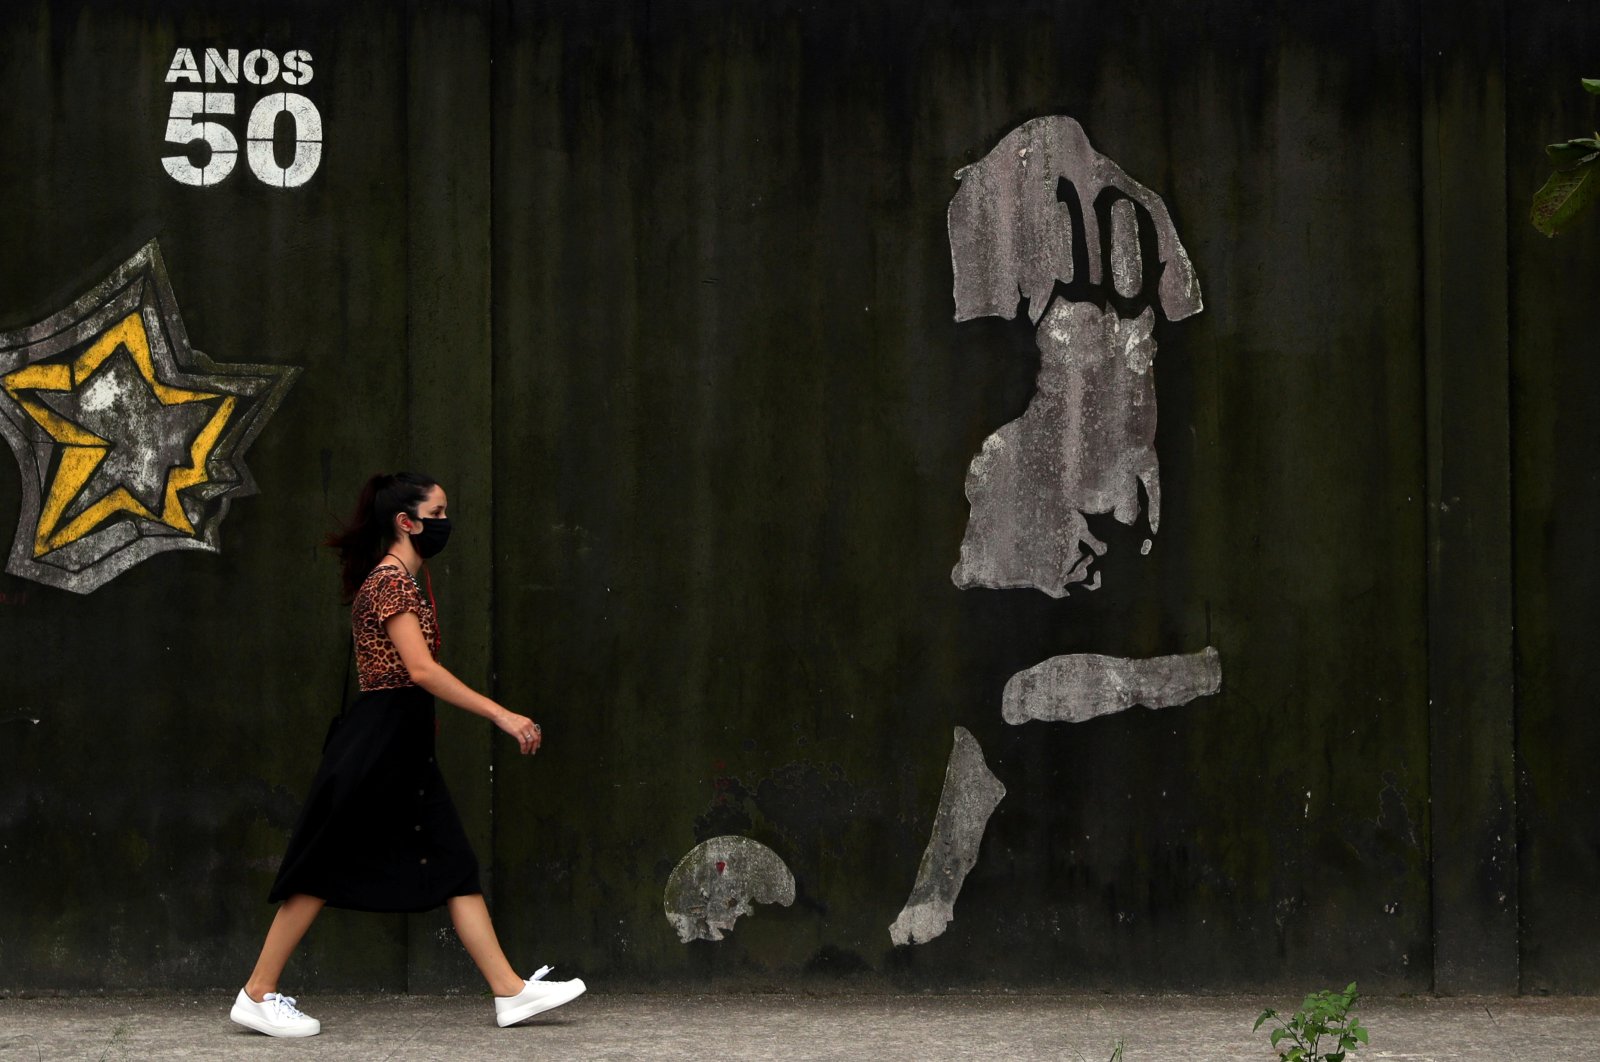 A woman walks by a mural depicting Brazilian soccer legend Pele in his iconic number 10 shirt, in Santos, Brazil, Oct. 20, 2020. (Reuters Photo)